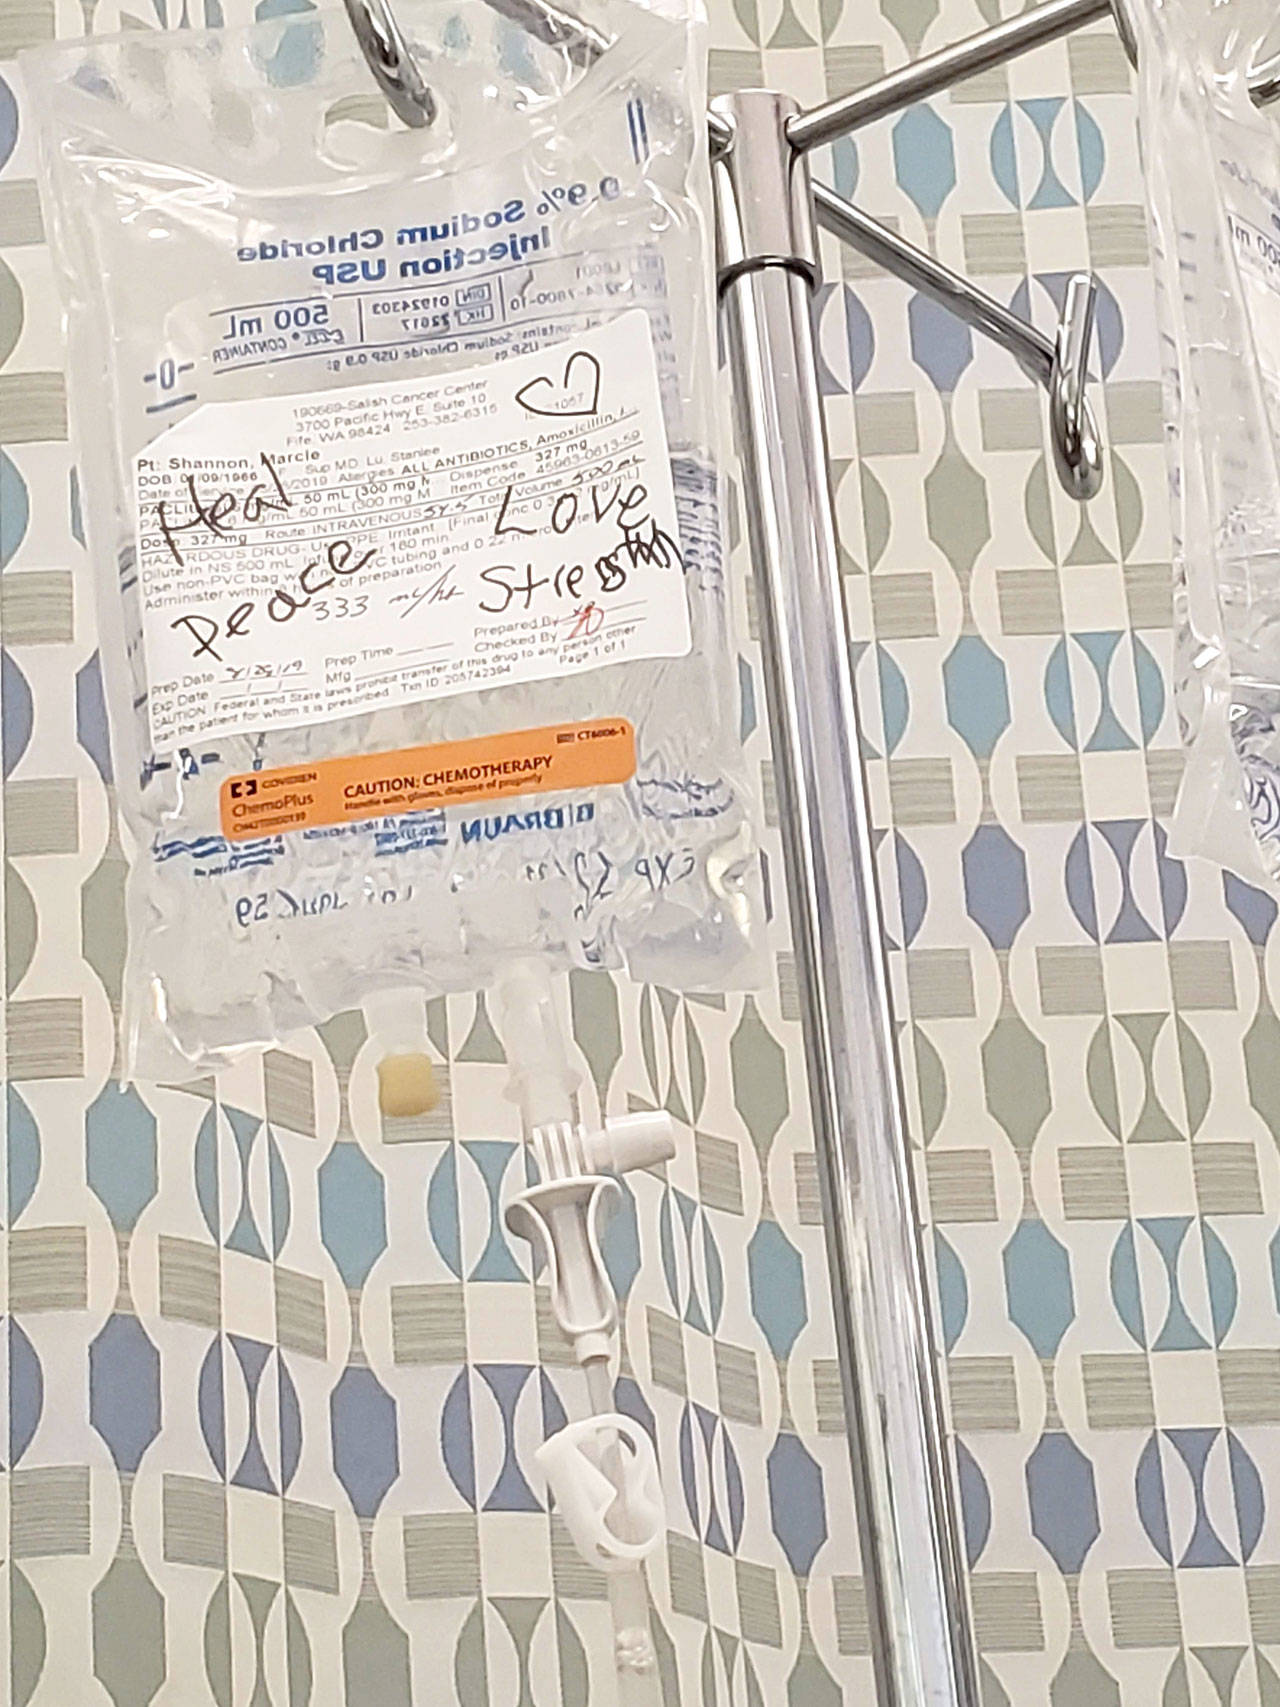 Marcie Shannon wrote words such as “heal, peace, love and strength” on her IV bags to help uplift her during her chemotherapy treatments. Courtesy photo